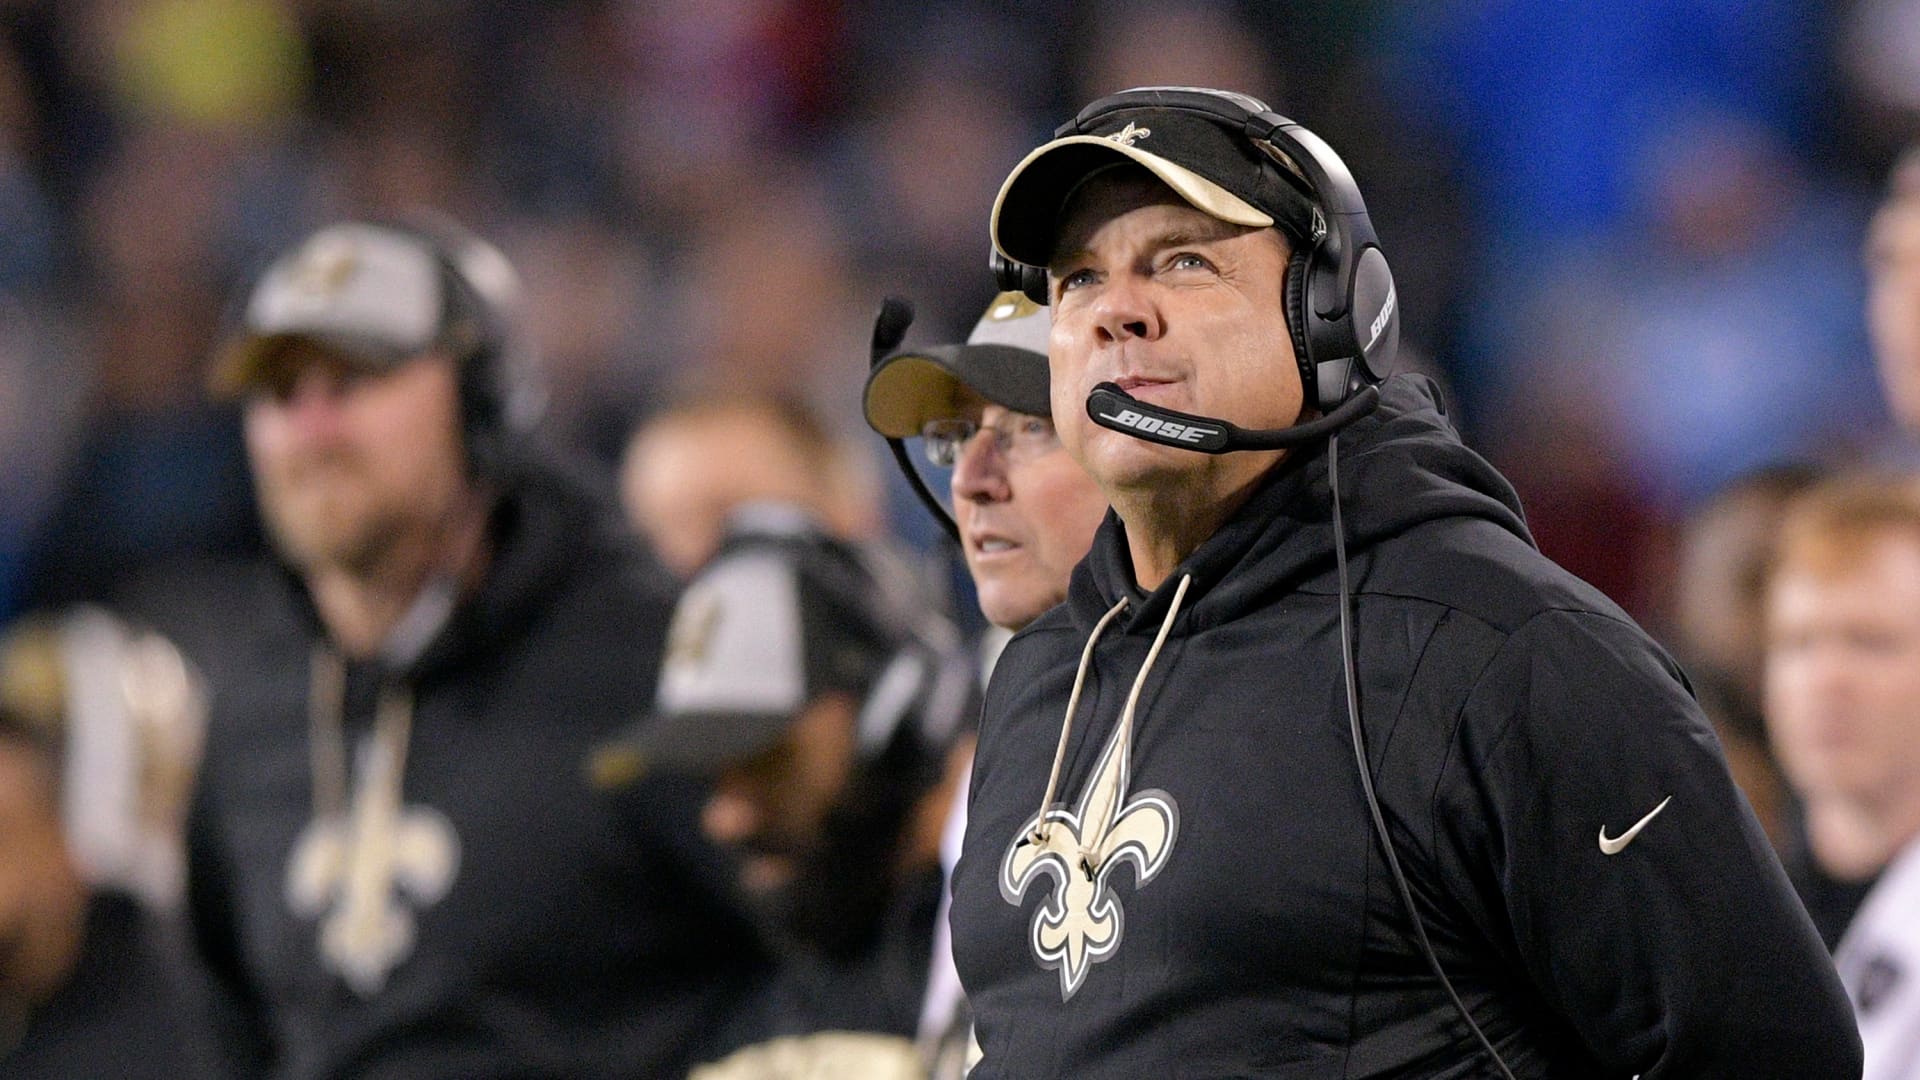 Why Saints coach Sean Payton brought $200,000 in cash to a team meeting